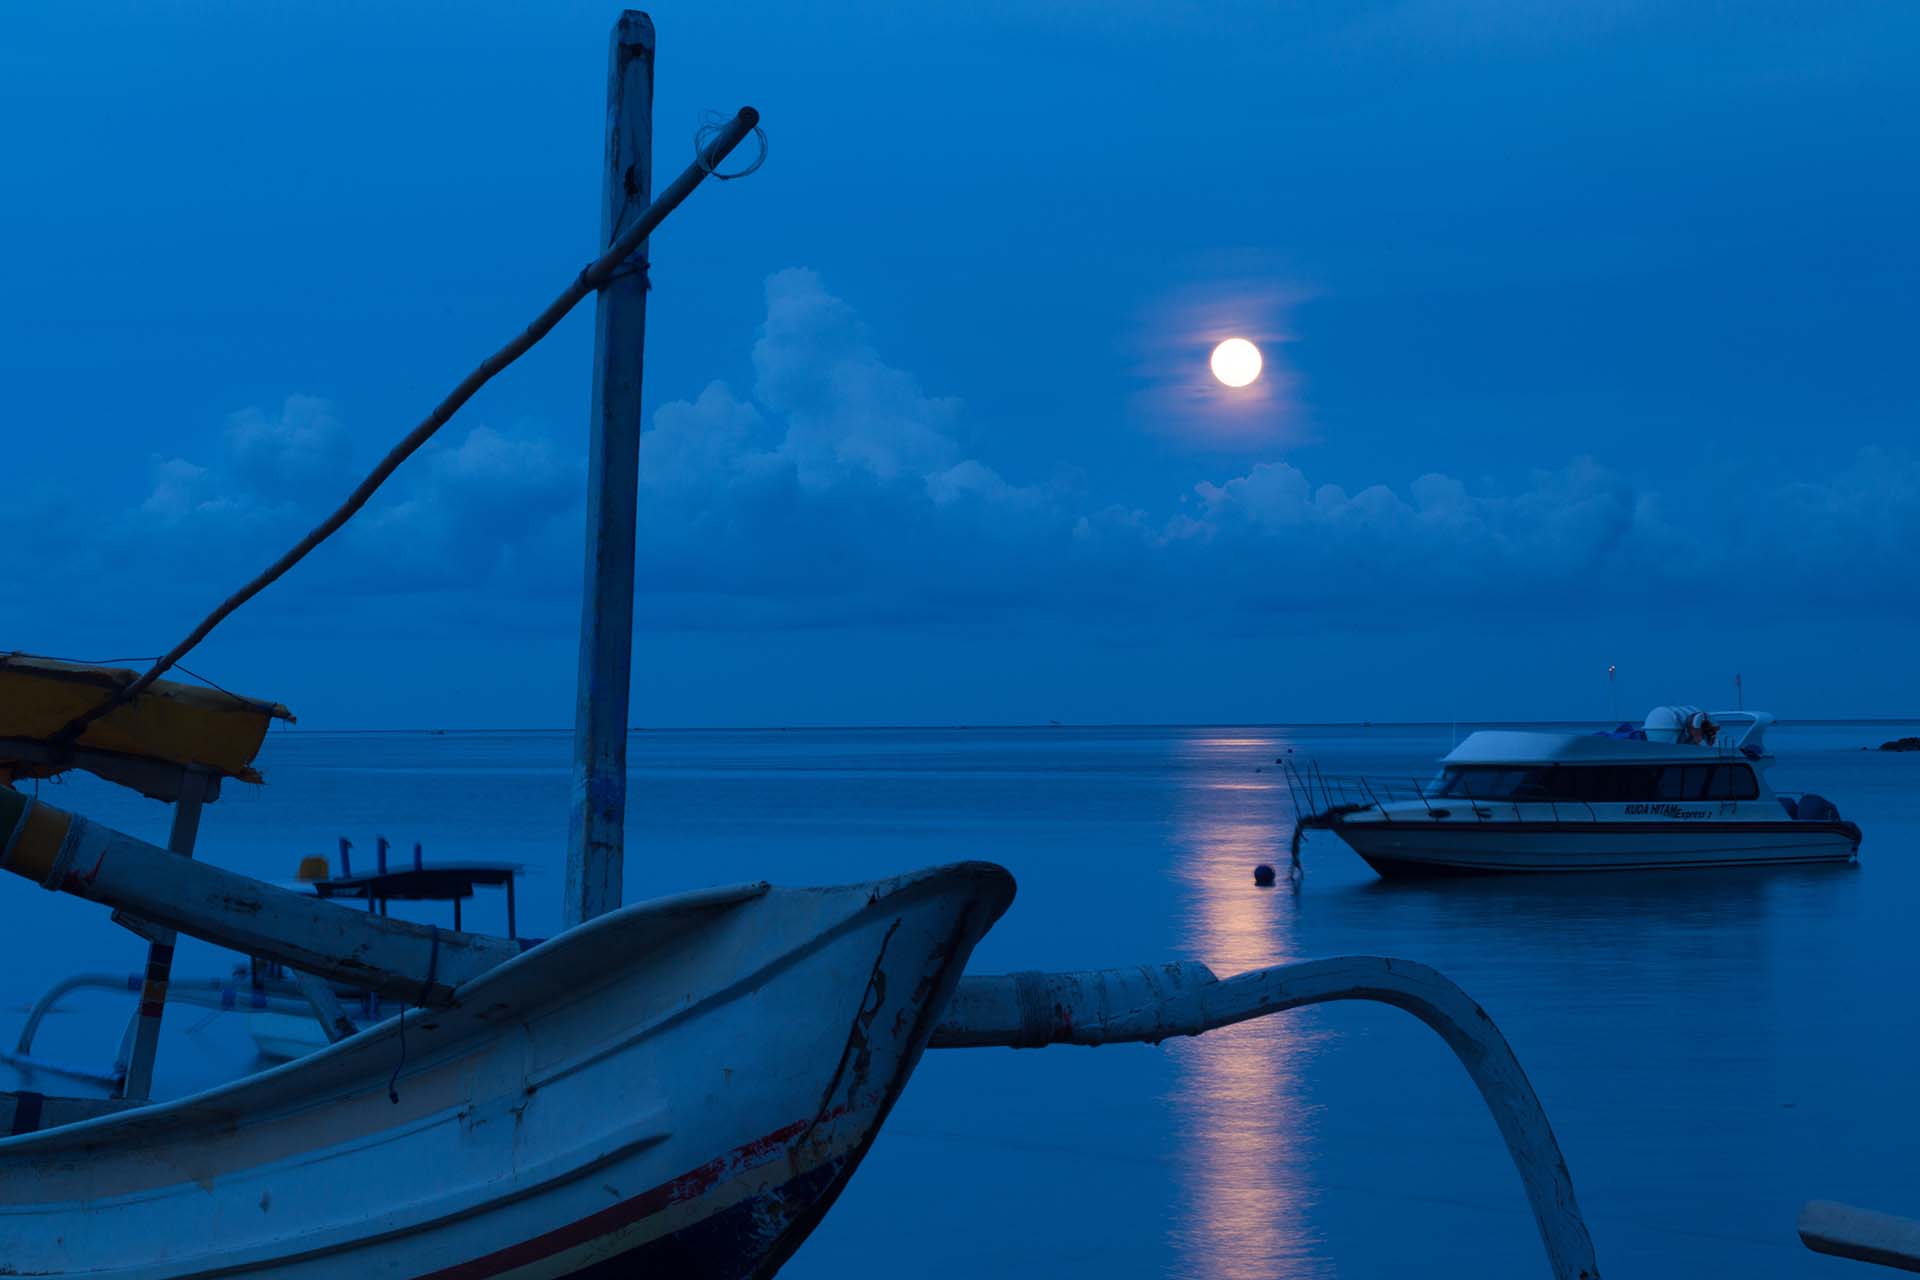 Boats on the shore with a full moon in the sky